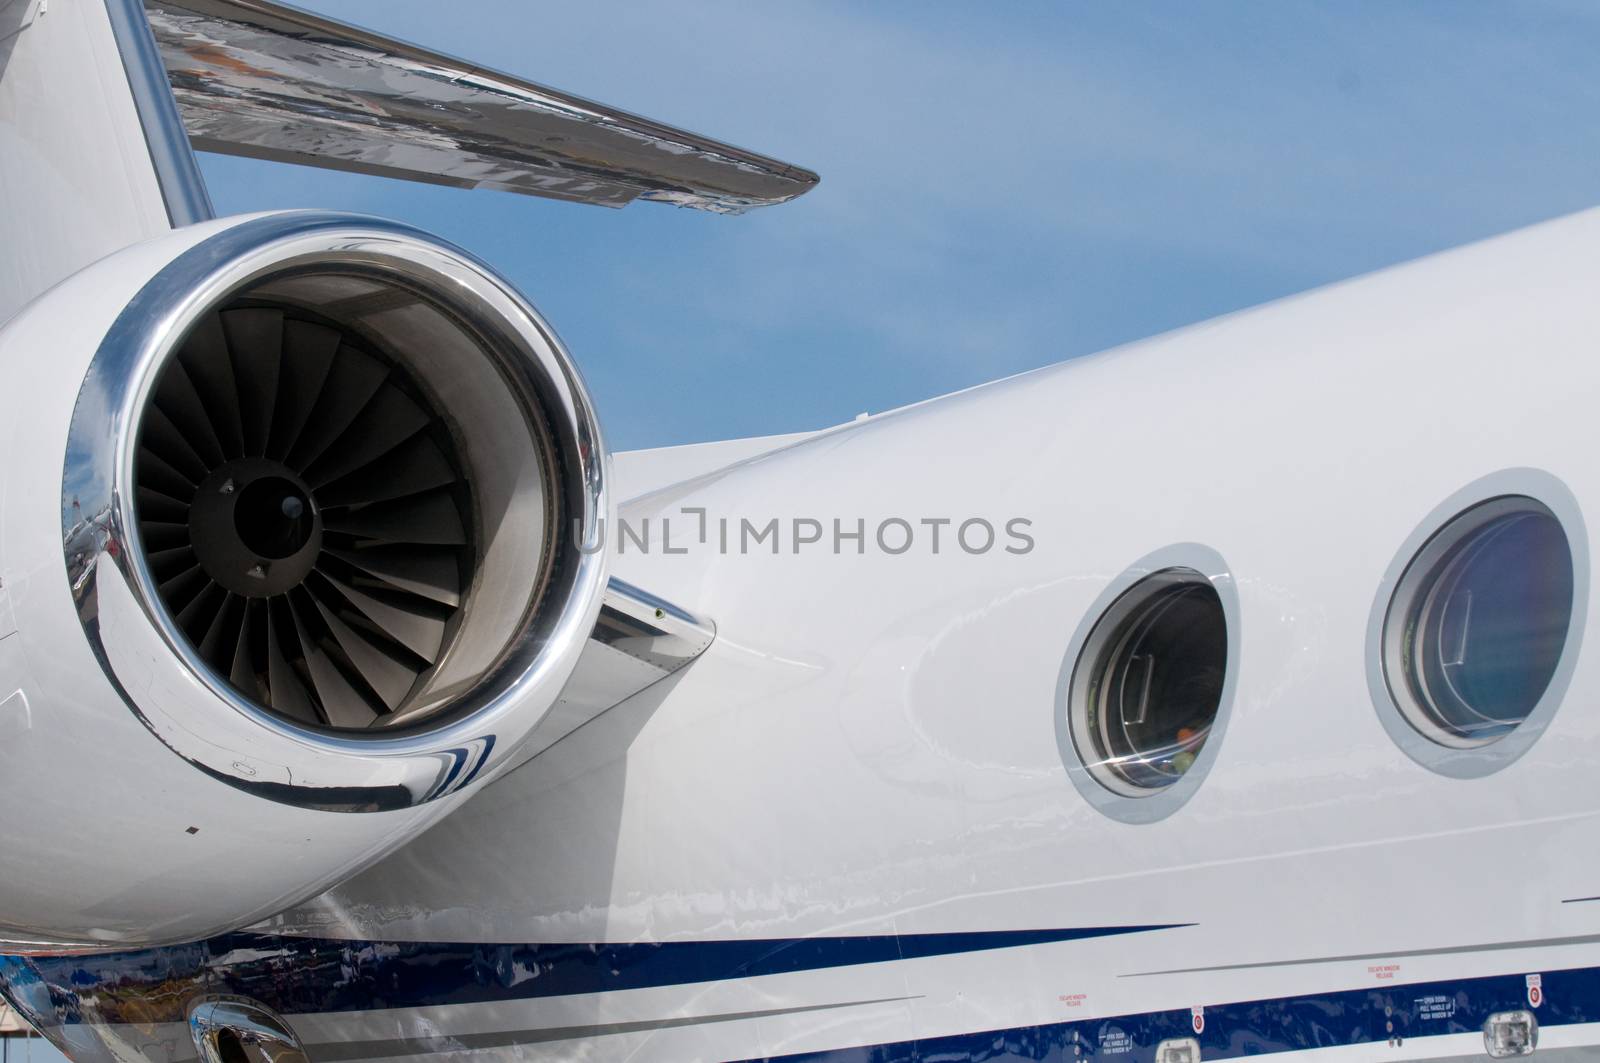 Engine, windows and tail fin of white, luxury corporate jet